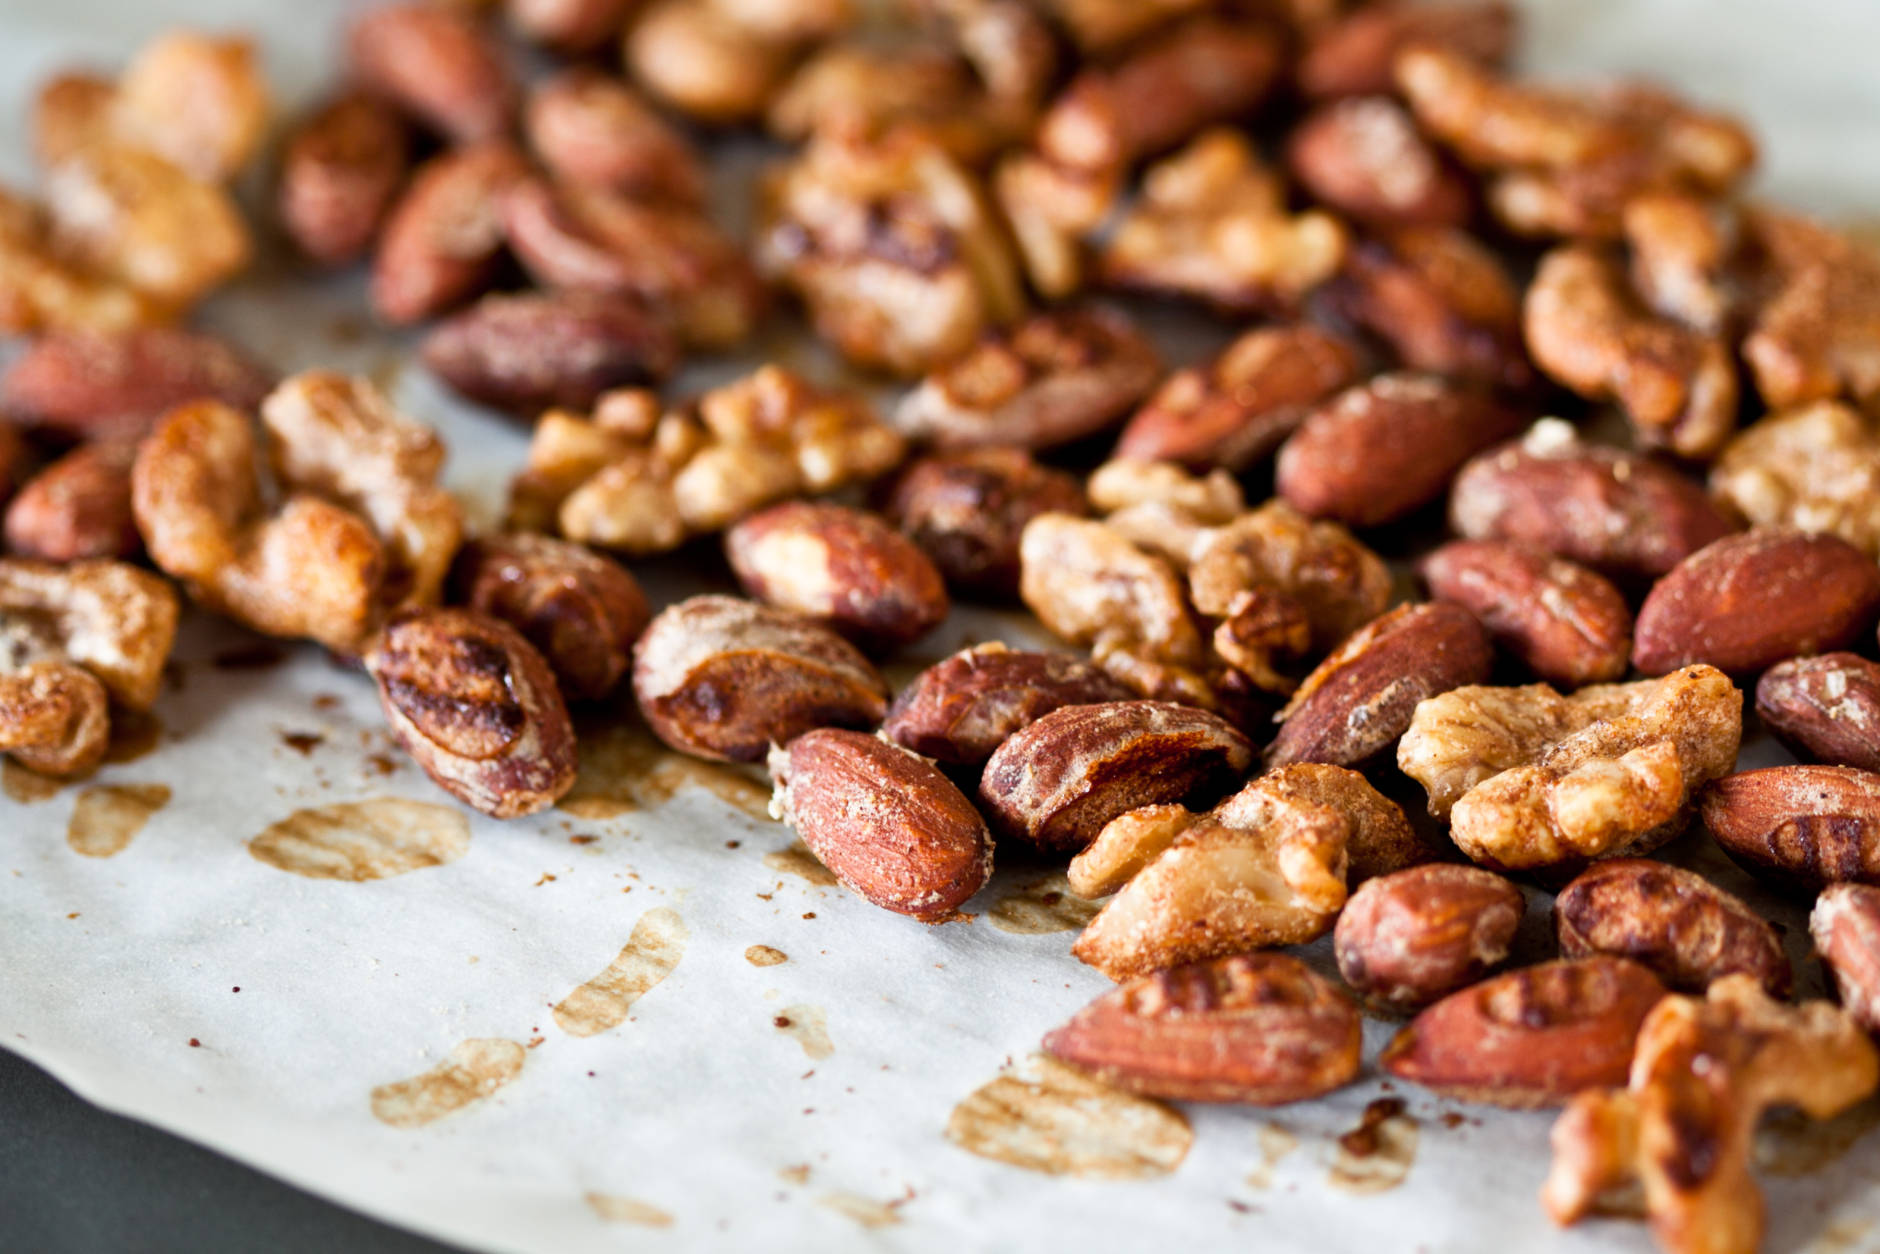 Spiced almonds and walnuts on a baking sheet